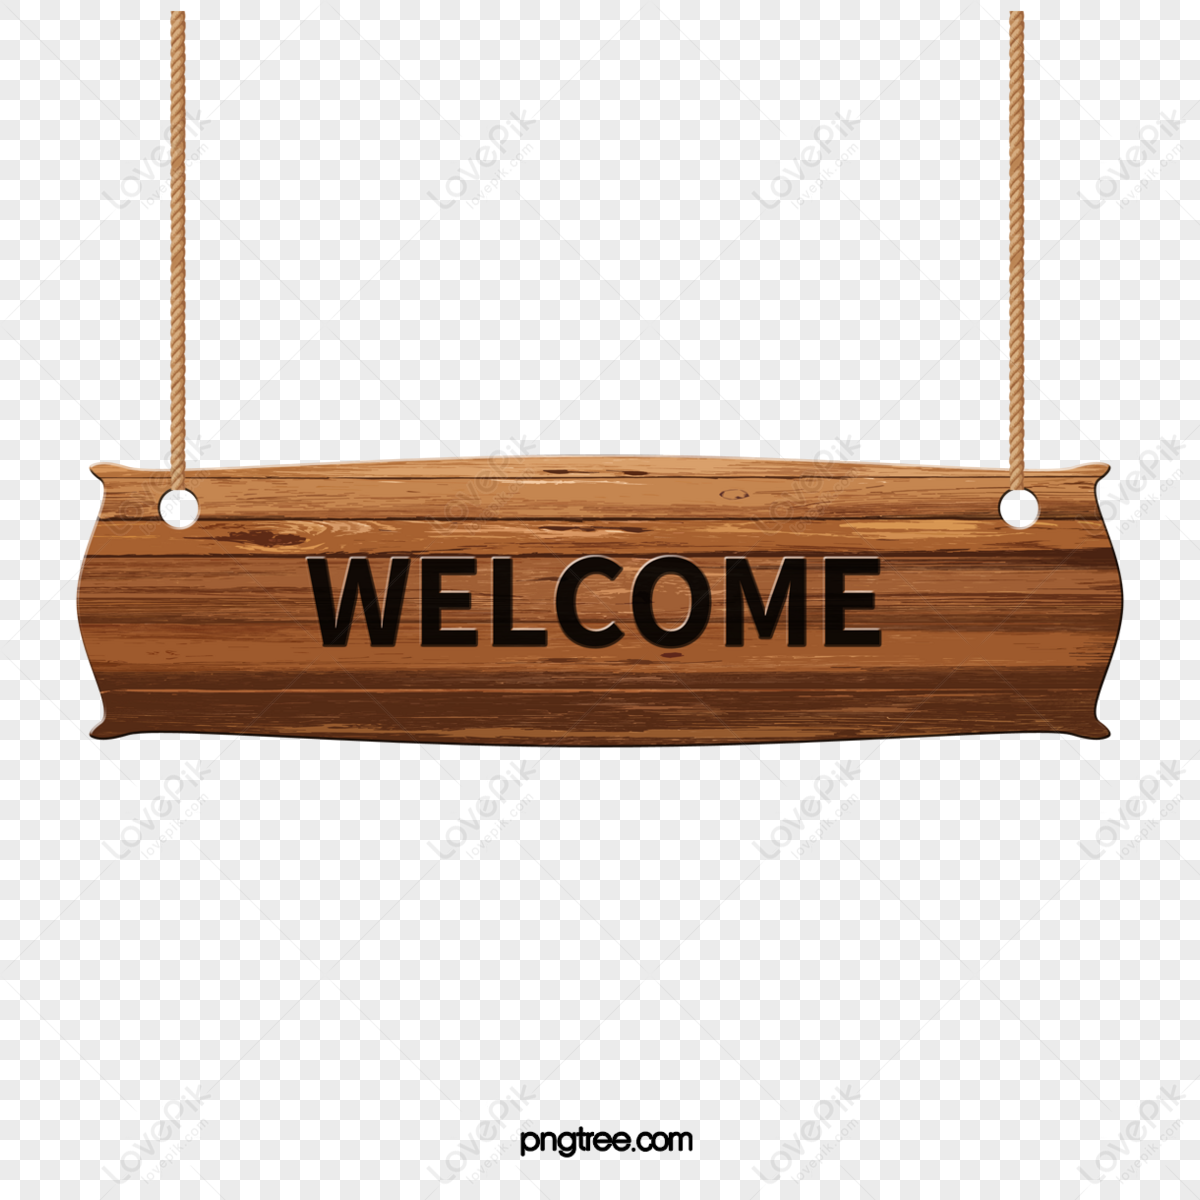 beautiful exquisite wood taobao shop logo welcome to the title bar billboard png image